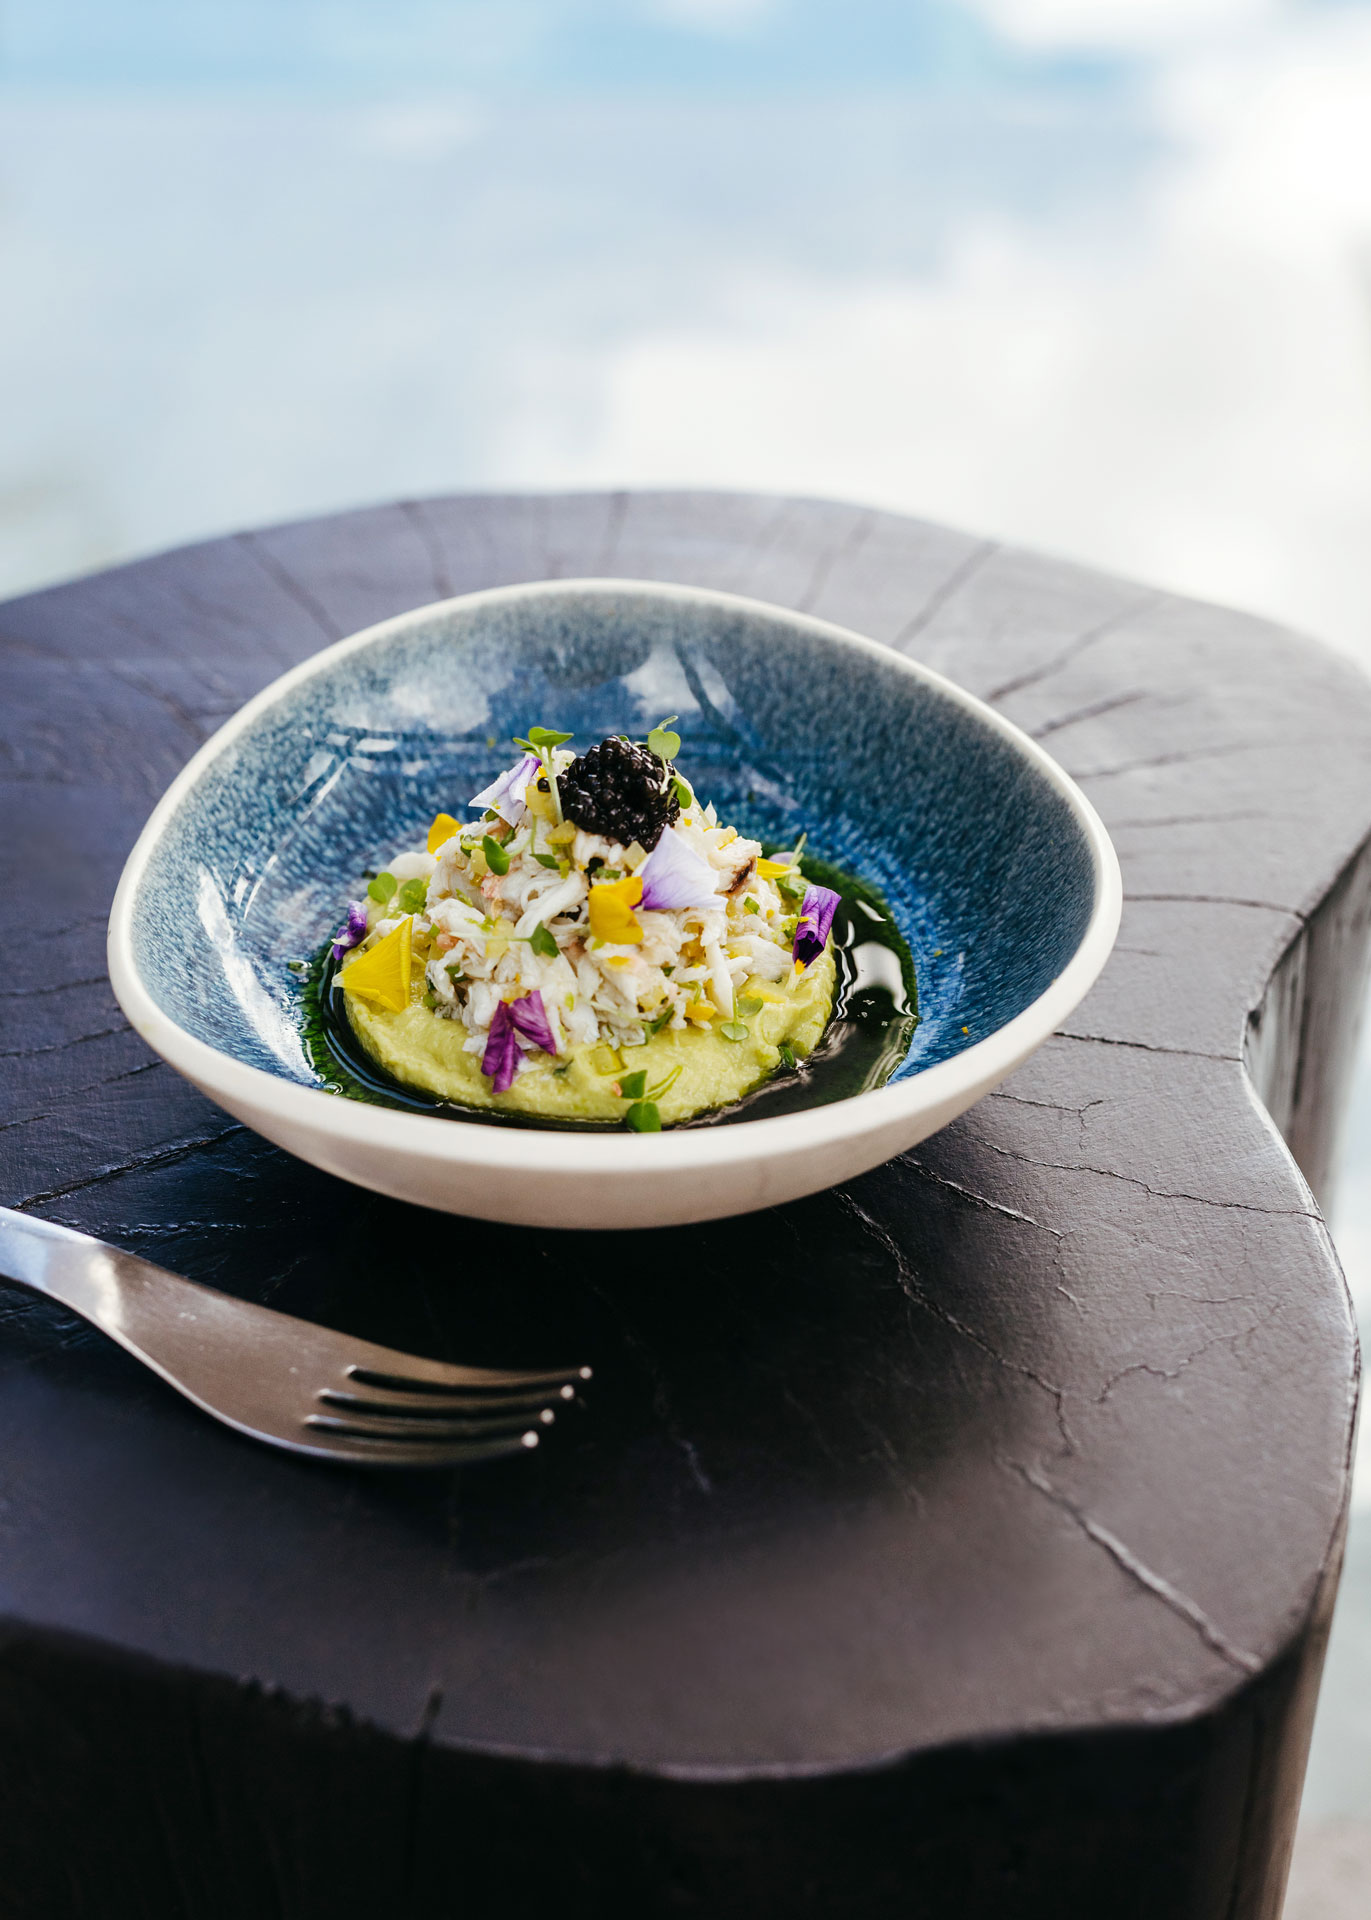 LUX<bdi>*</bdi> Grand Baie reveals the Crudo Menu, a collaborative creation with renowned French Michelin-starred Chef Justin Schmitt